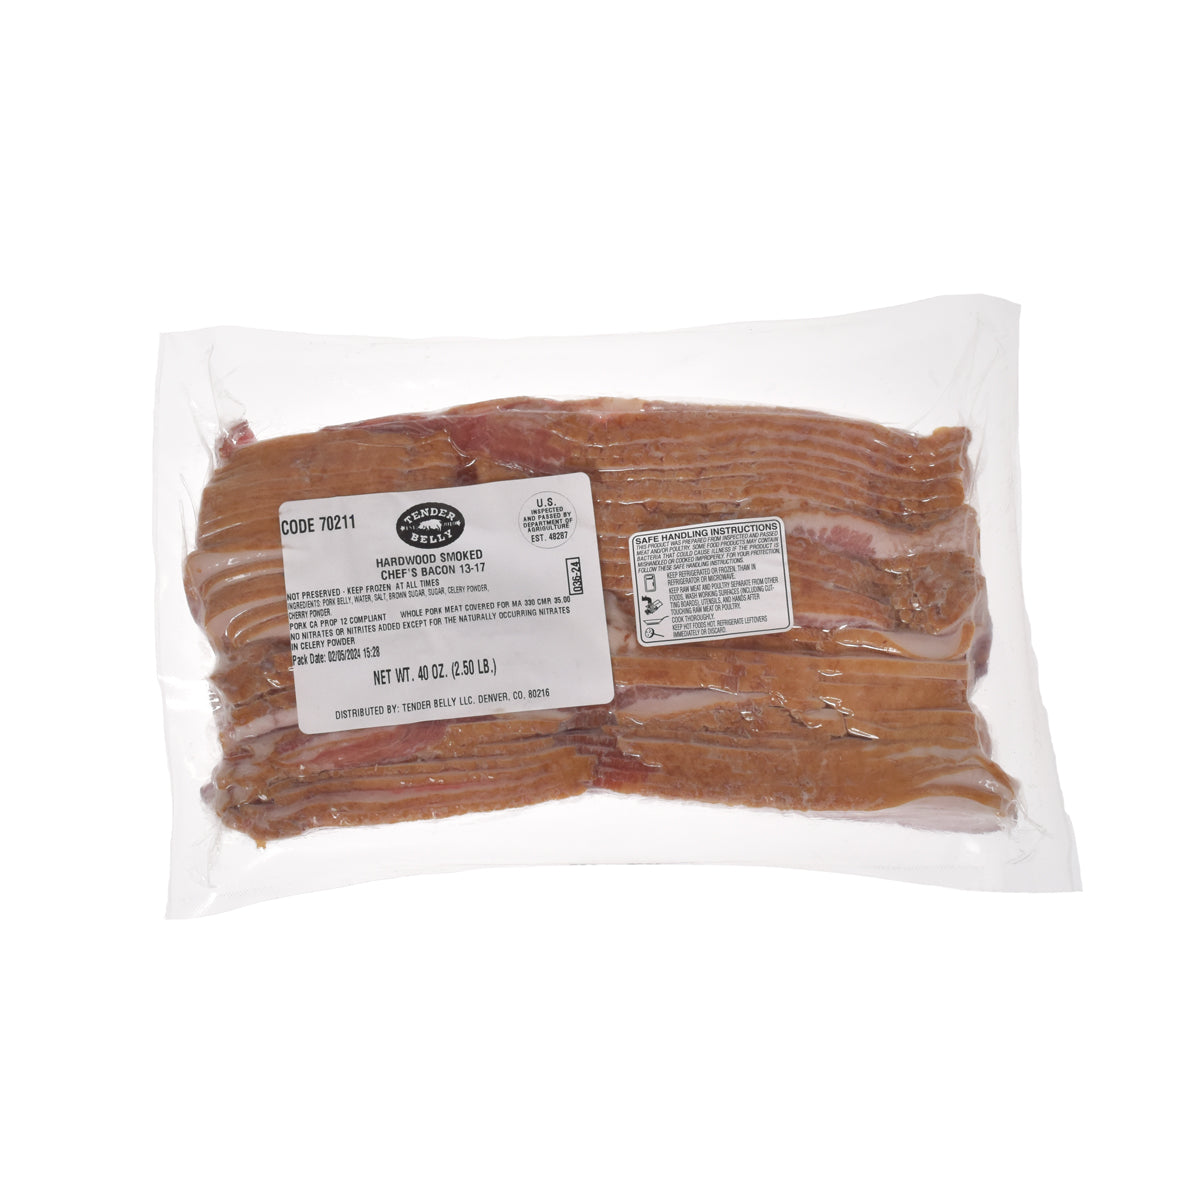 Tender Belly Hardwood Smoked Chef's Bacon 10 lb